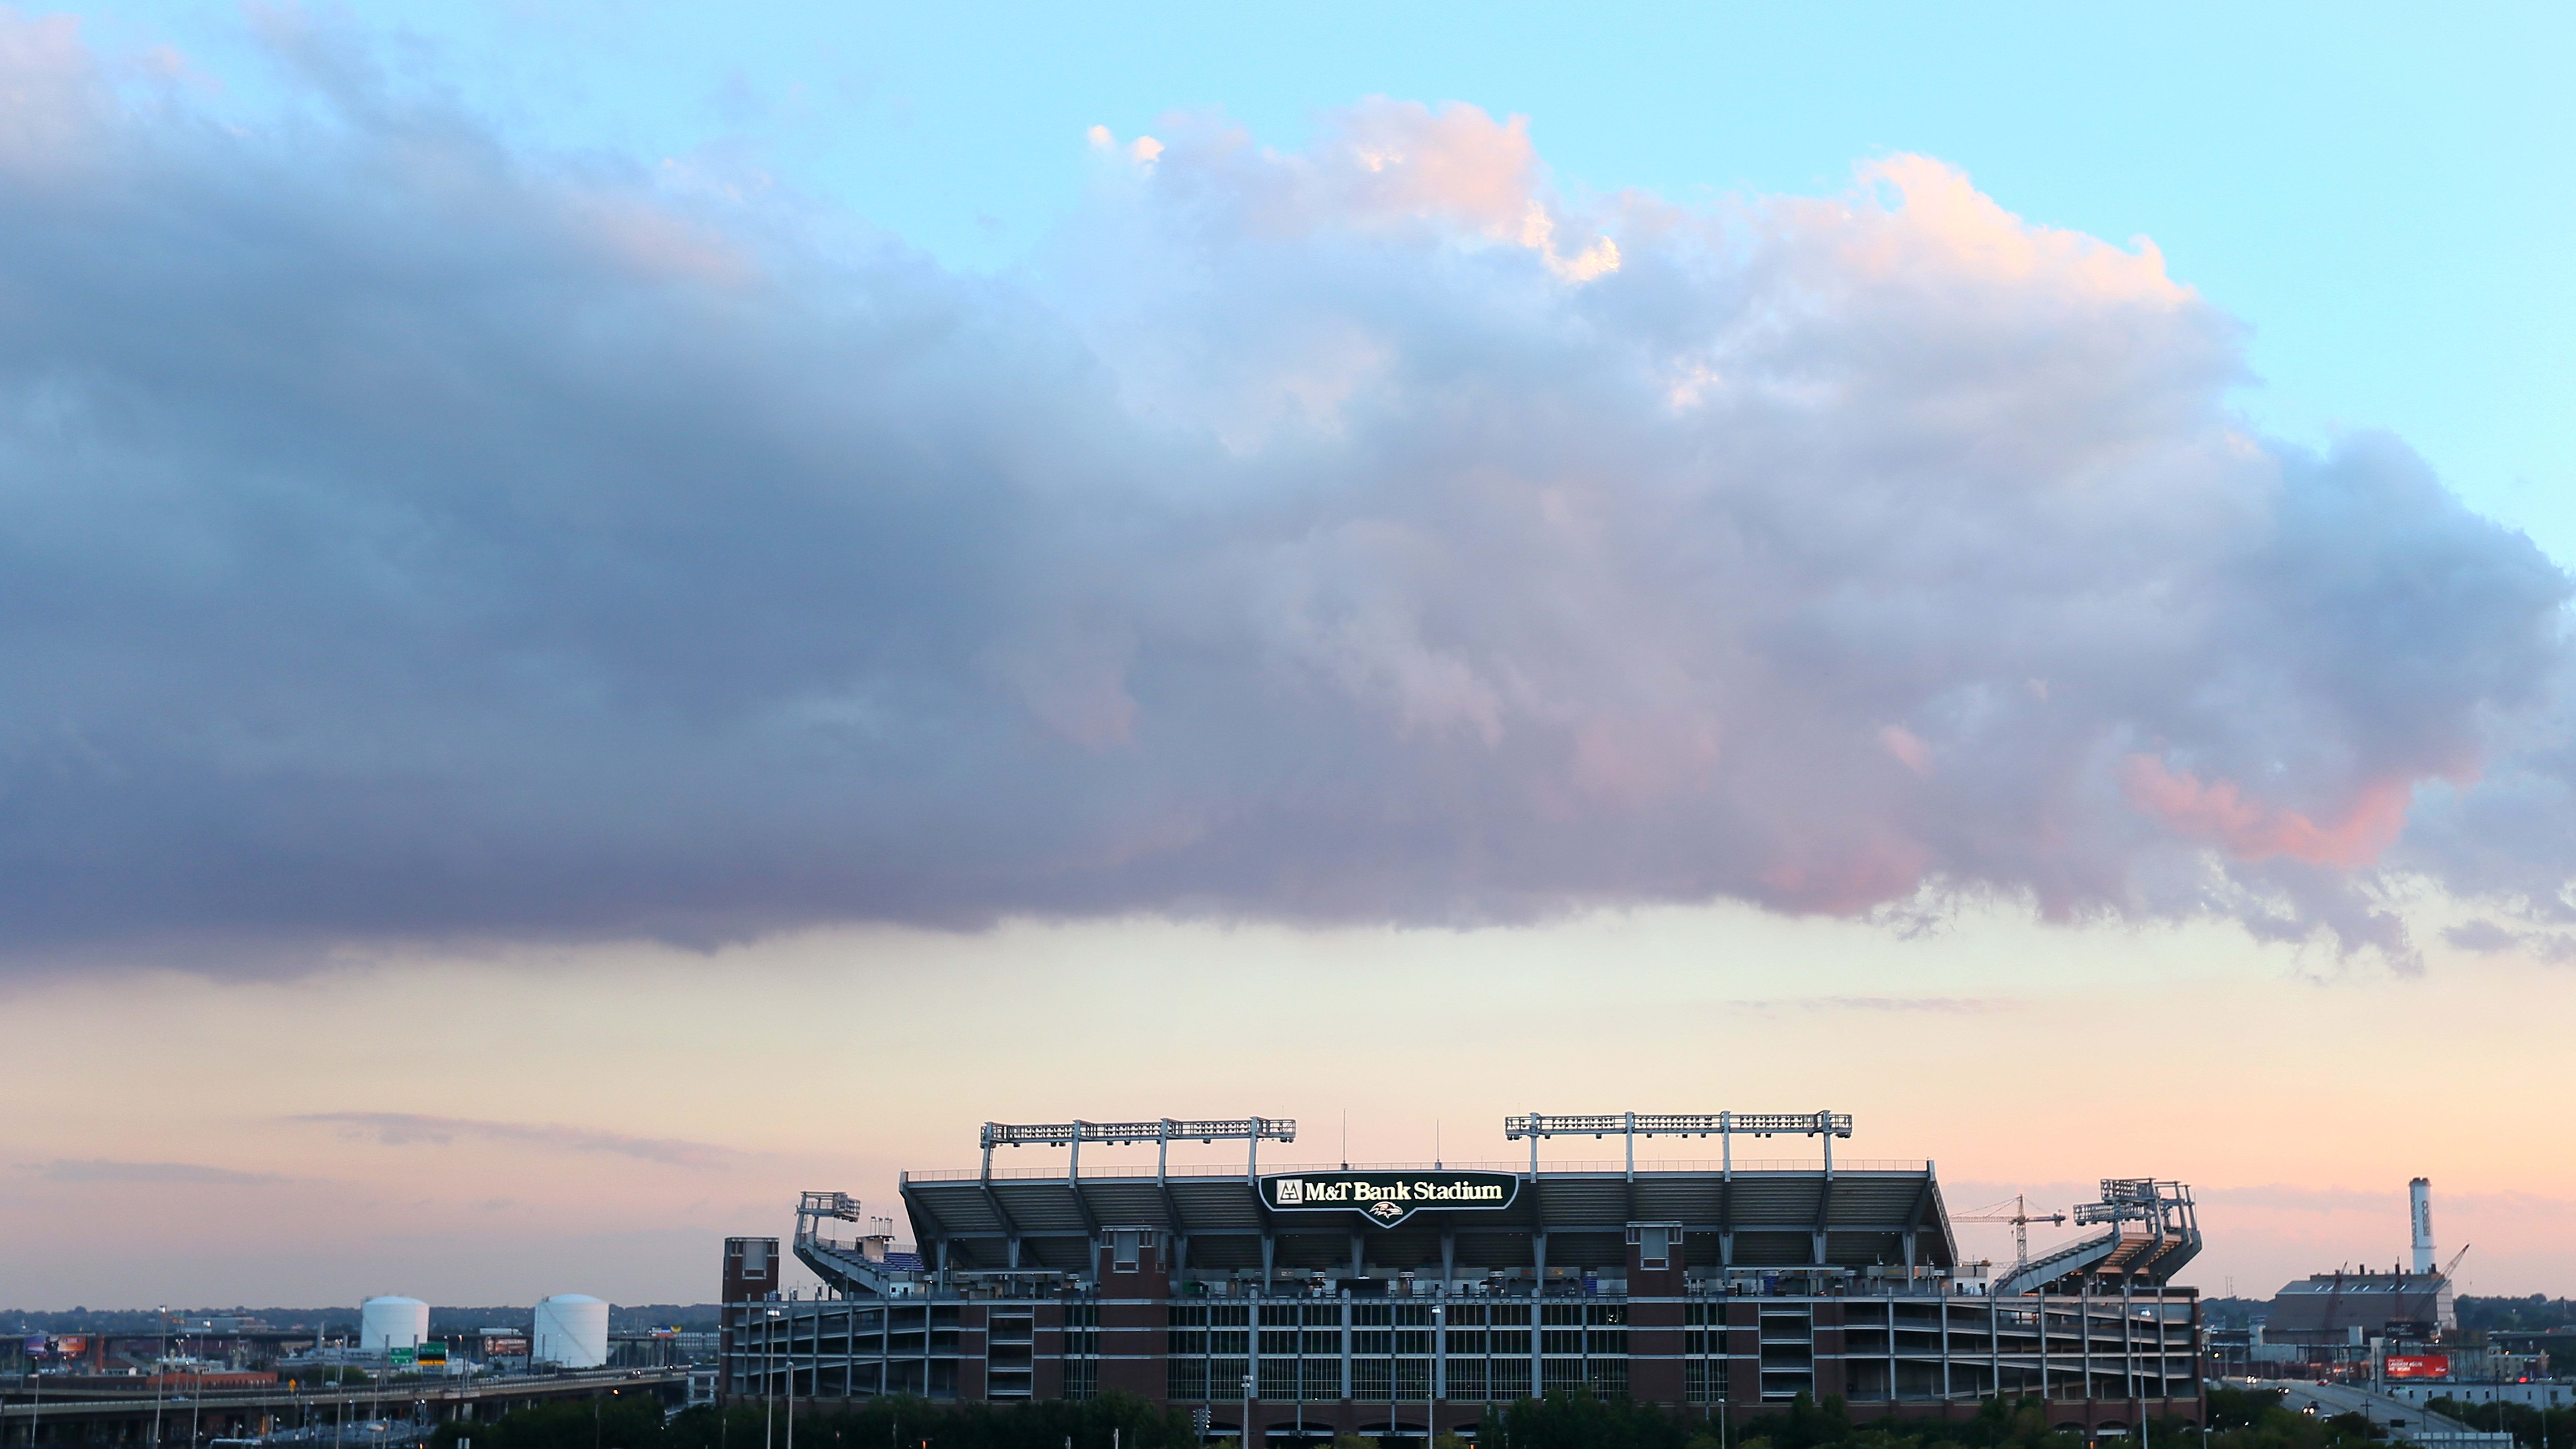 The Ravens, whose stadium is pictured, teamed with the Orioles to donate to a recovery fund after the Key Bridge collapse